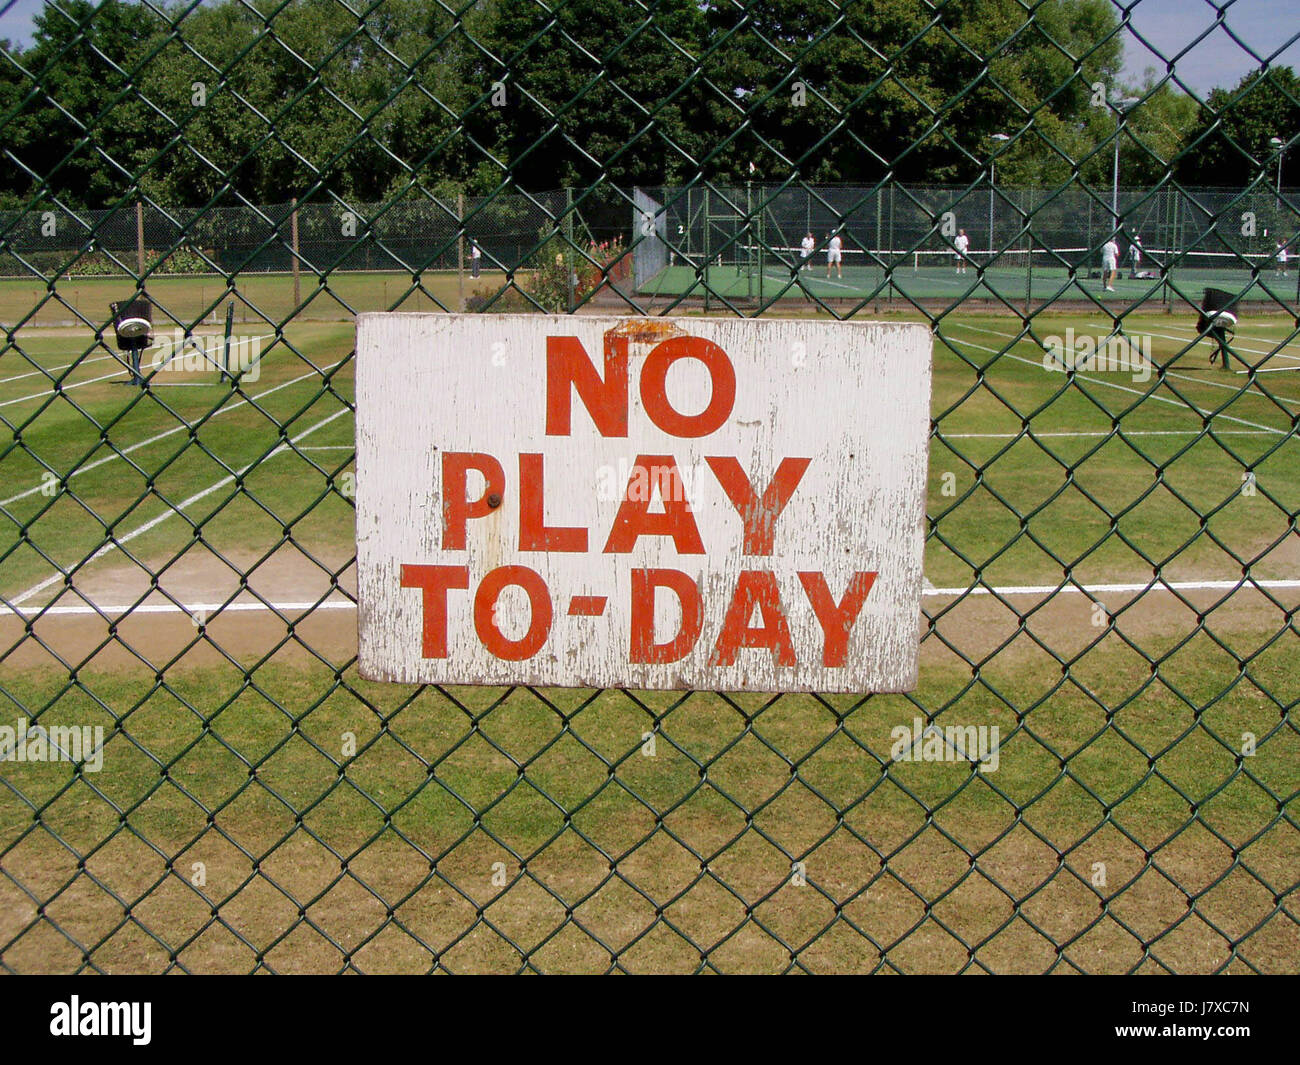 A 'no play today' sign on a fence at grass tennis courts at a club in Ealing, west London, England, UK in 2006. The hand-painted sign refers to 'TO-DAY' rather than the normal spelling of 'TODAY' Stock Photo